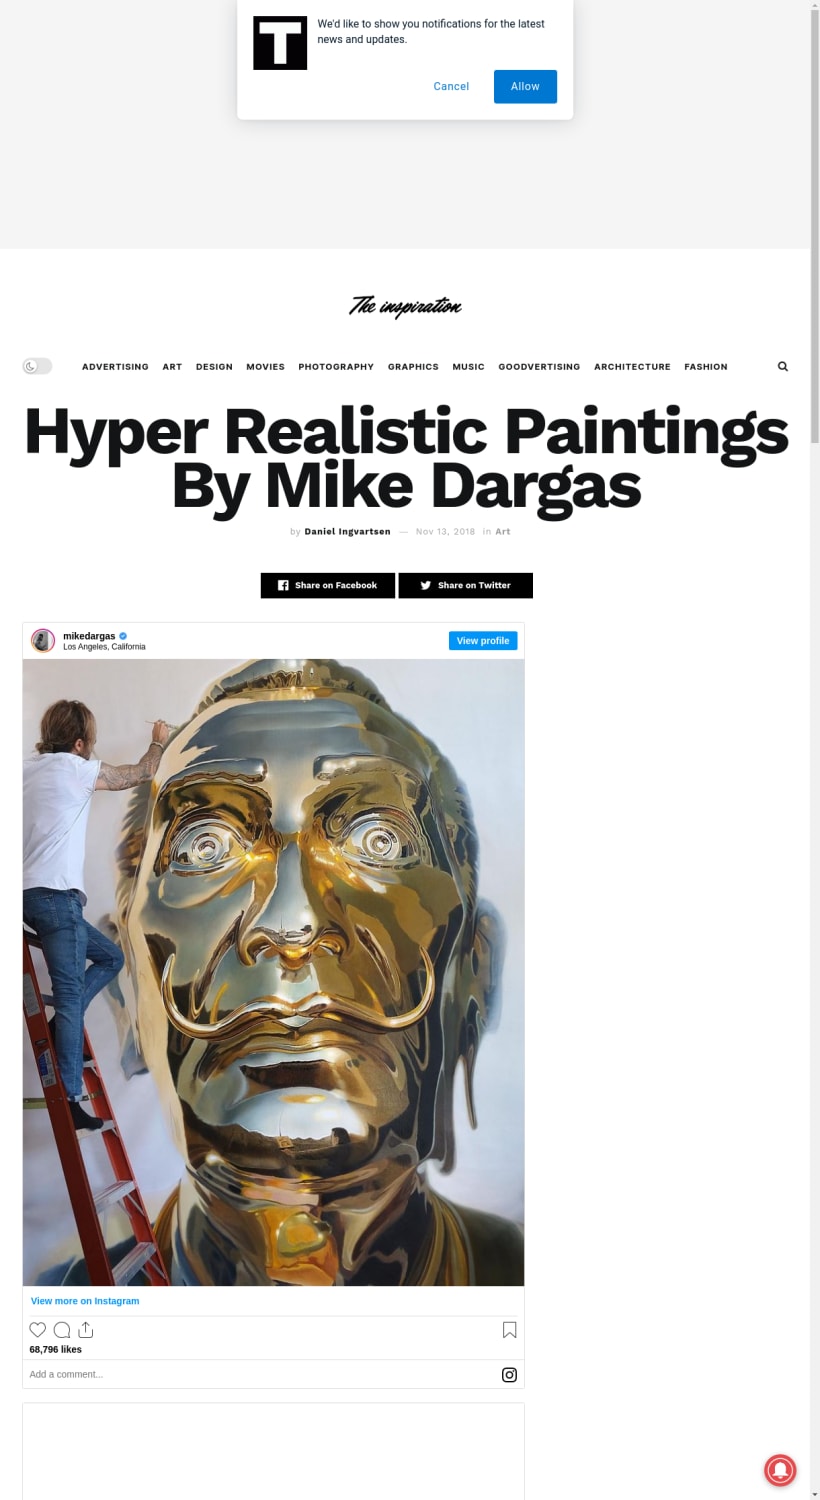 Hyper Realistic Paintings By Mike Dargas